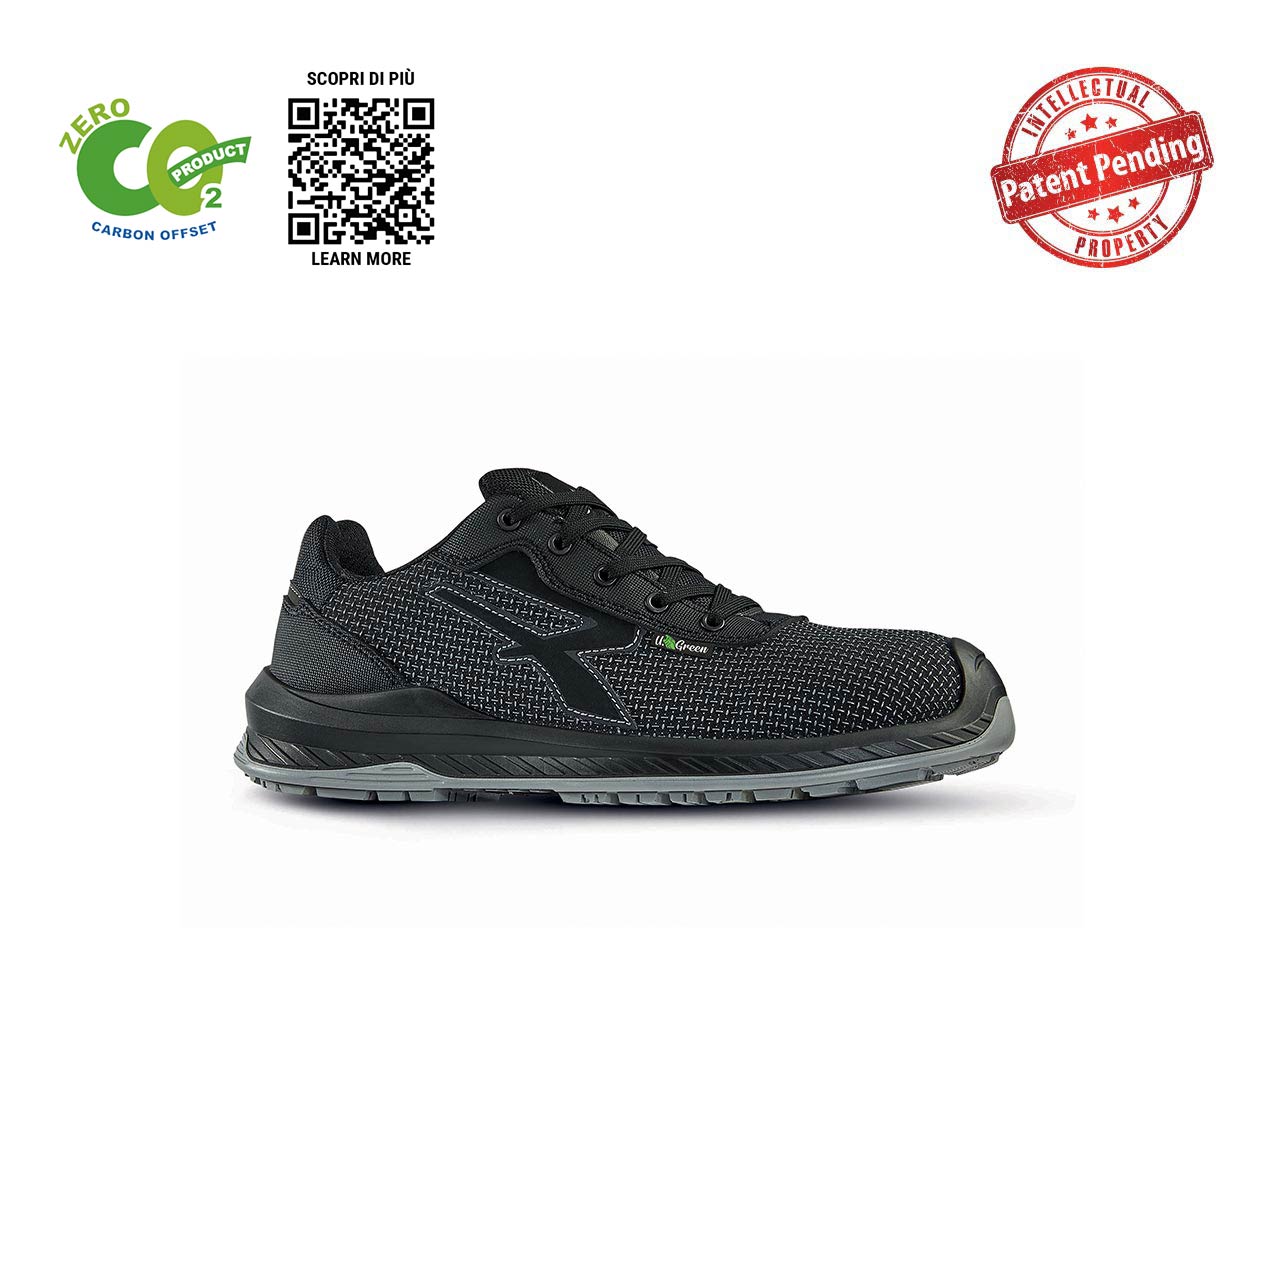 upower scarpa antinfortunistica modello ember linea red industry green vista laterale